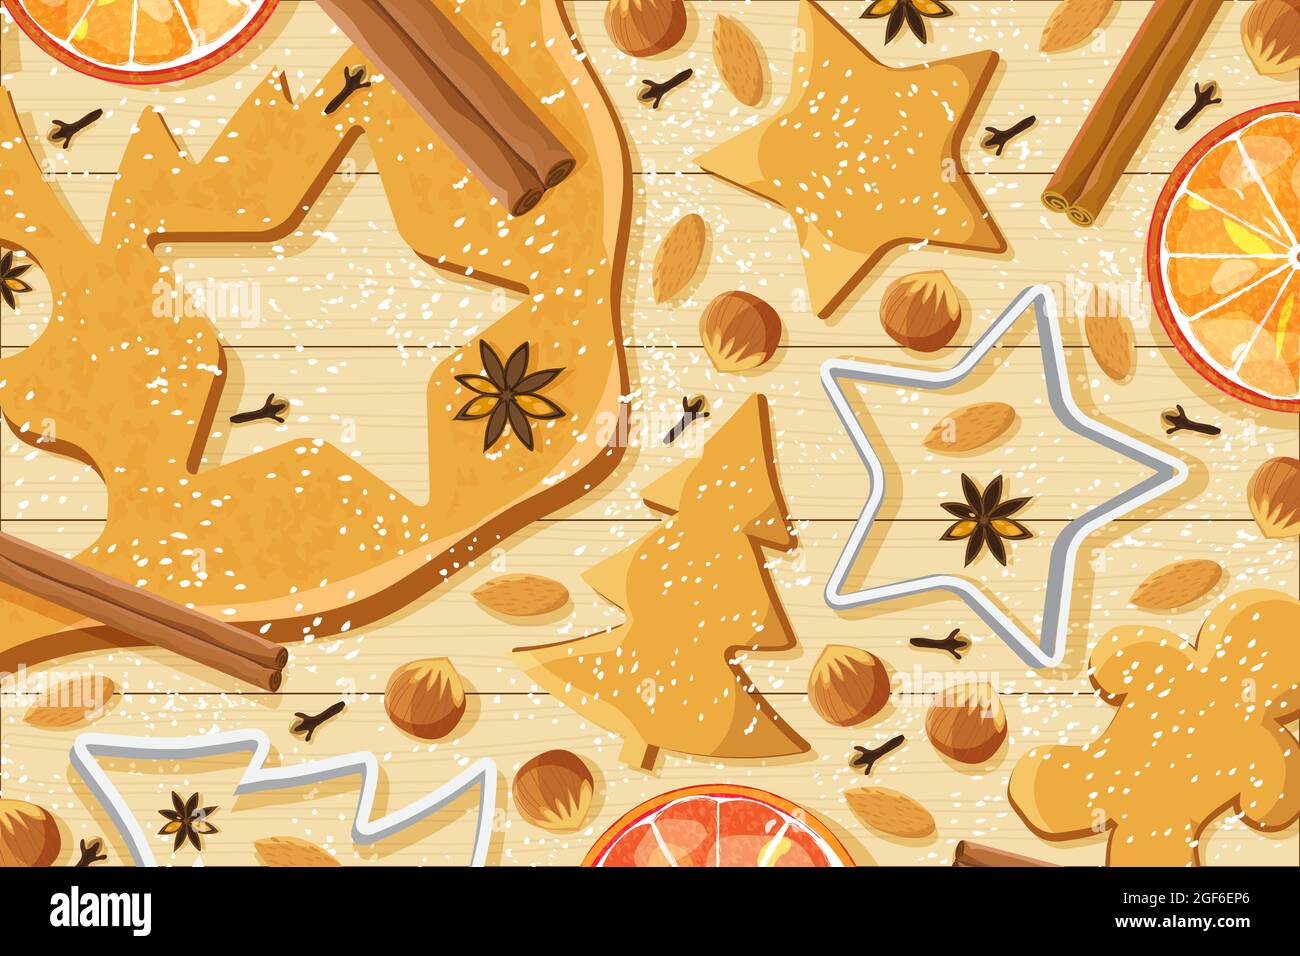 Christmas gingerbread baking background, vector illustration. Dough, cookie cutters and nuts. Stock Vector